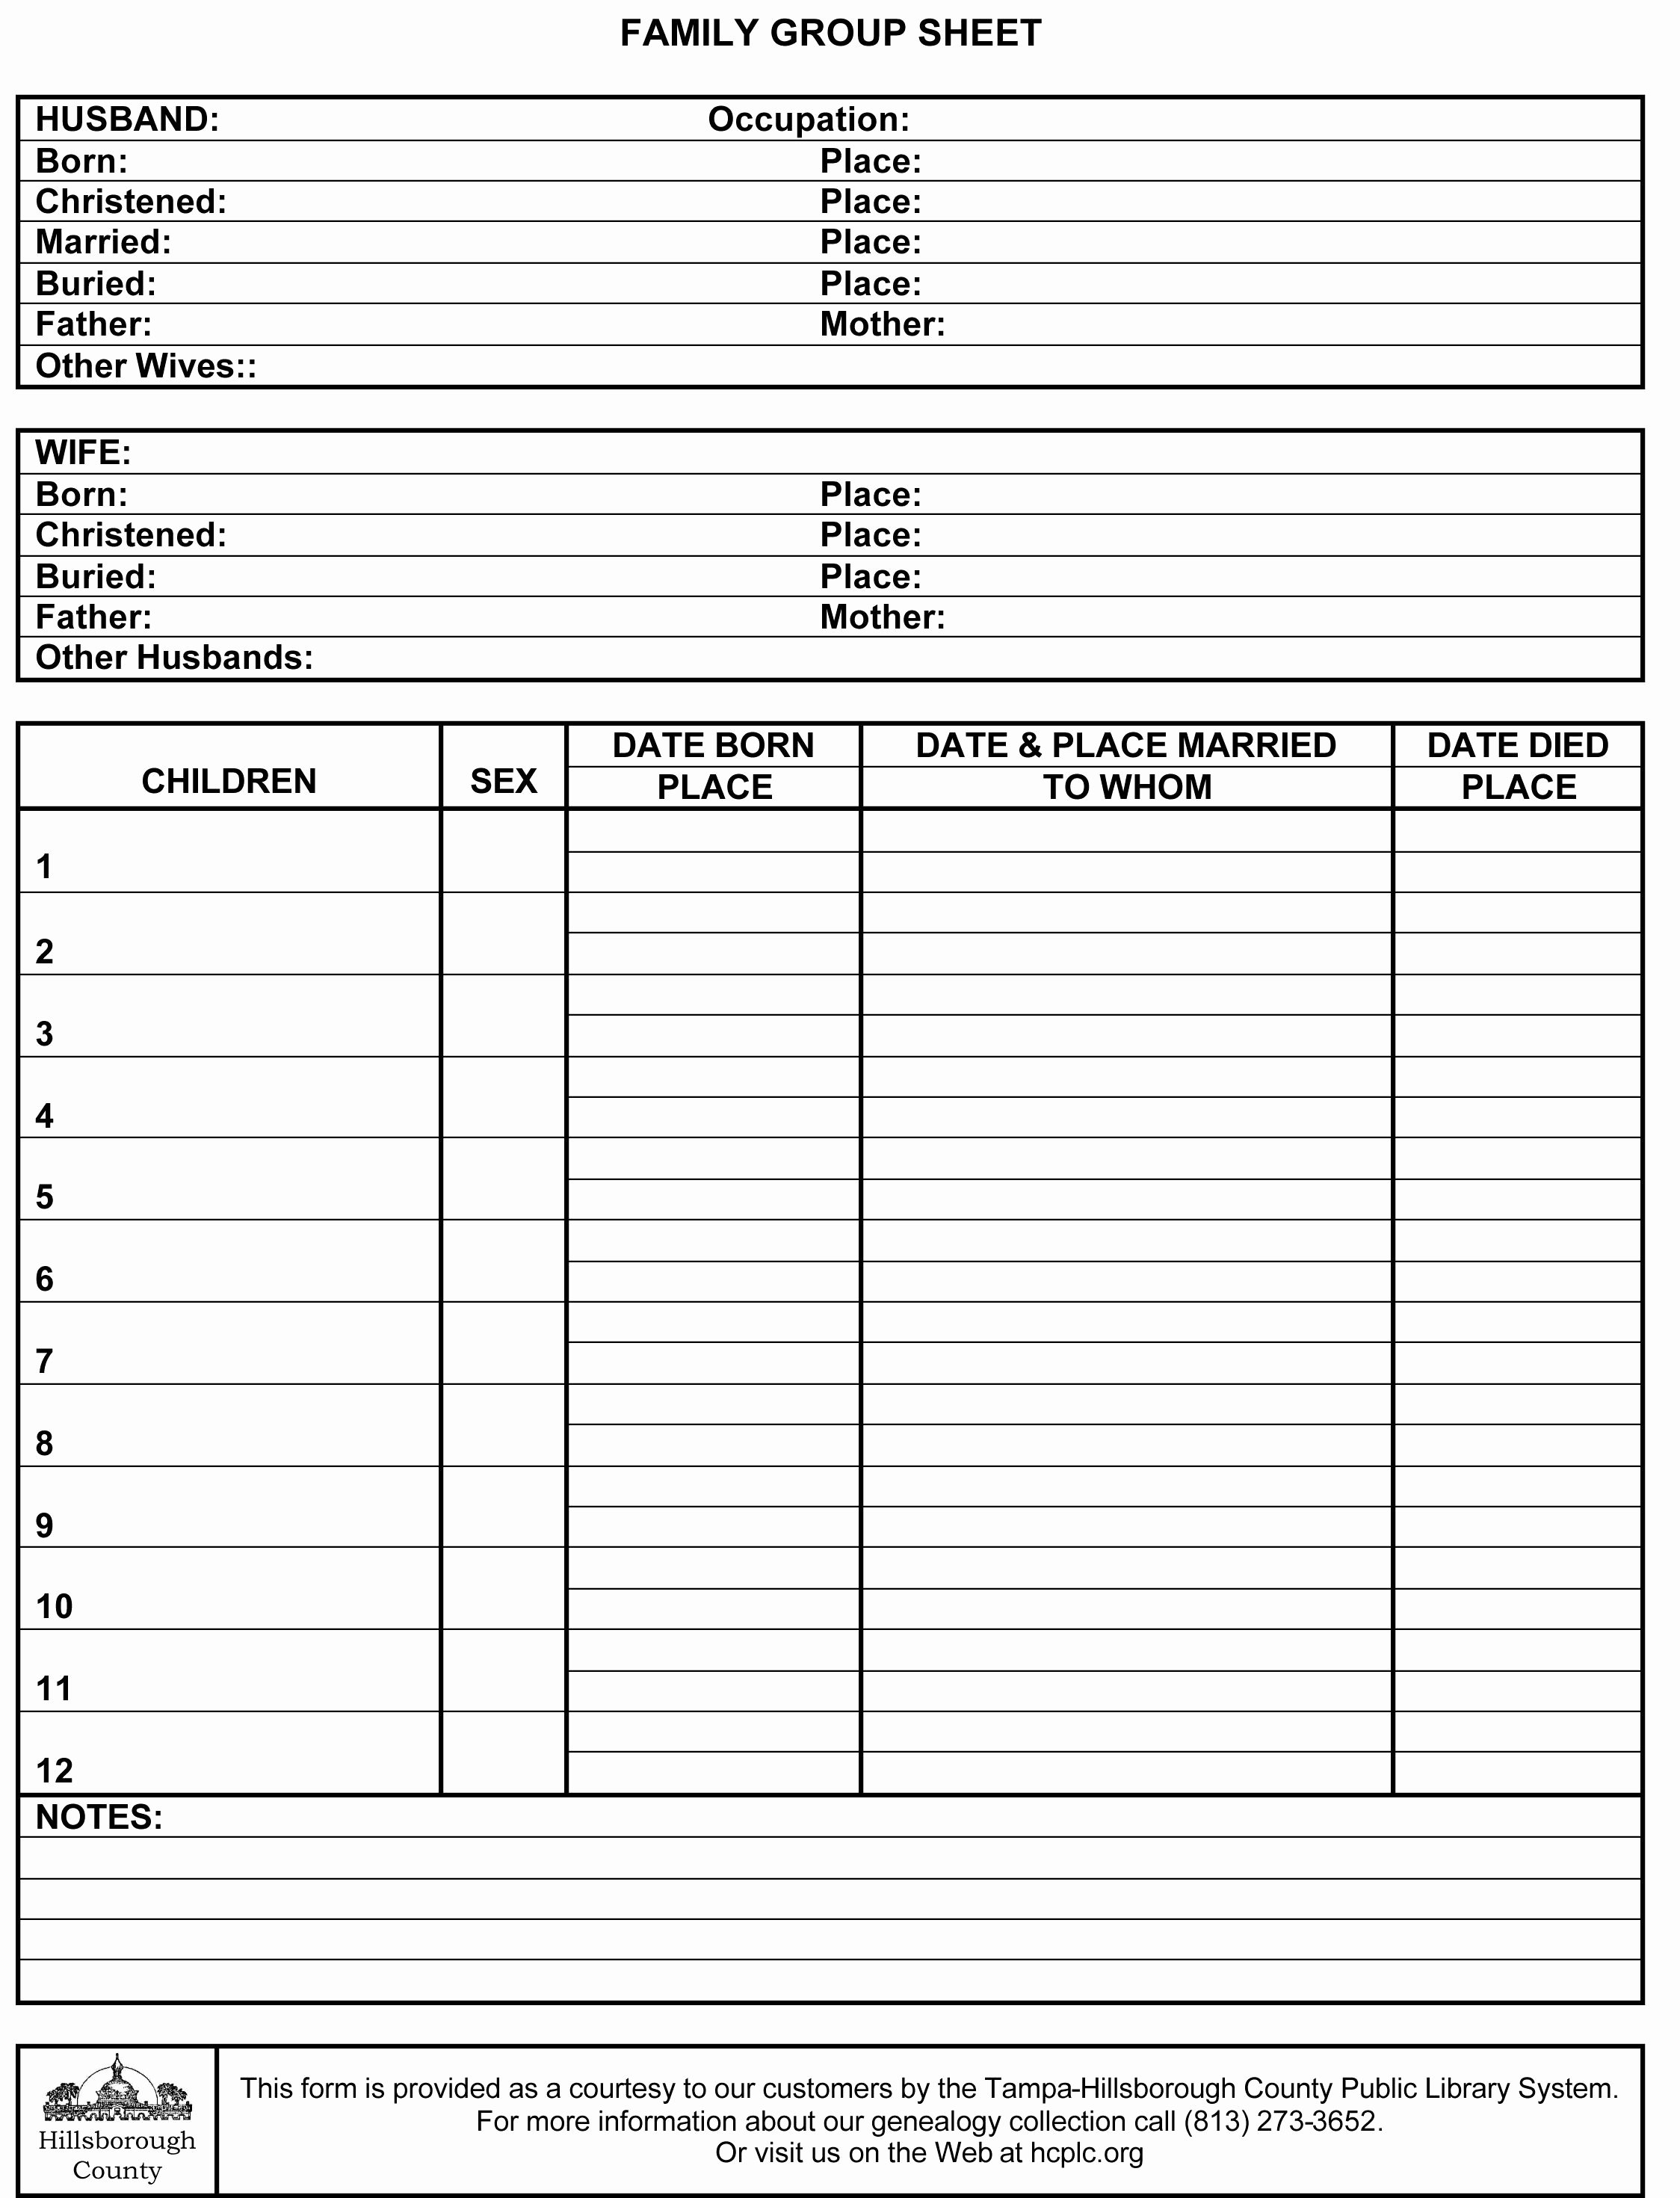 Family Tree Worksheet Printable Awesome Family Group Sheet Pile Information About An Ancestor